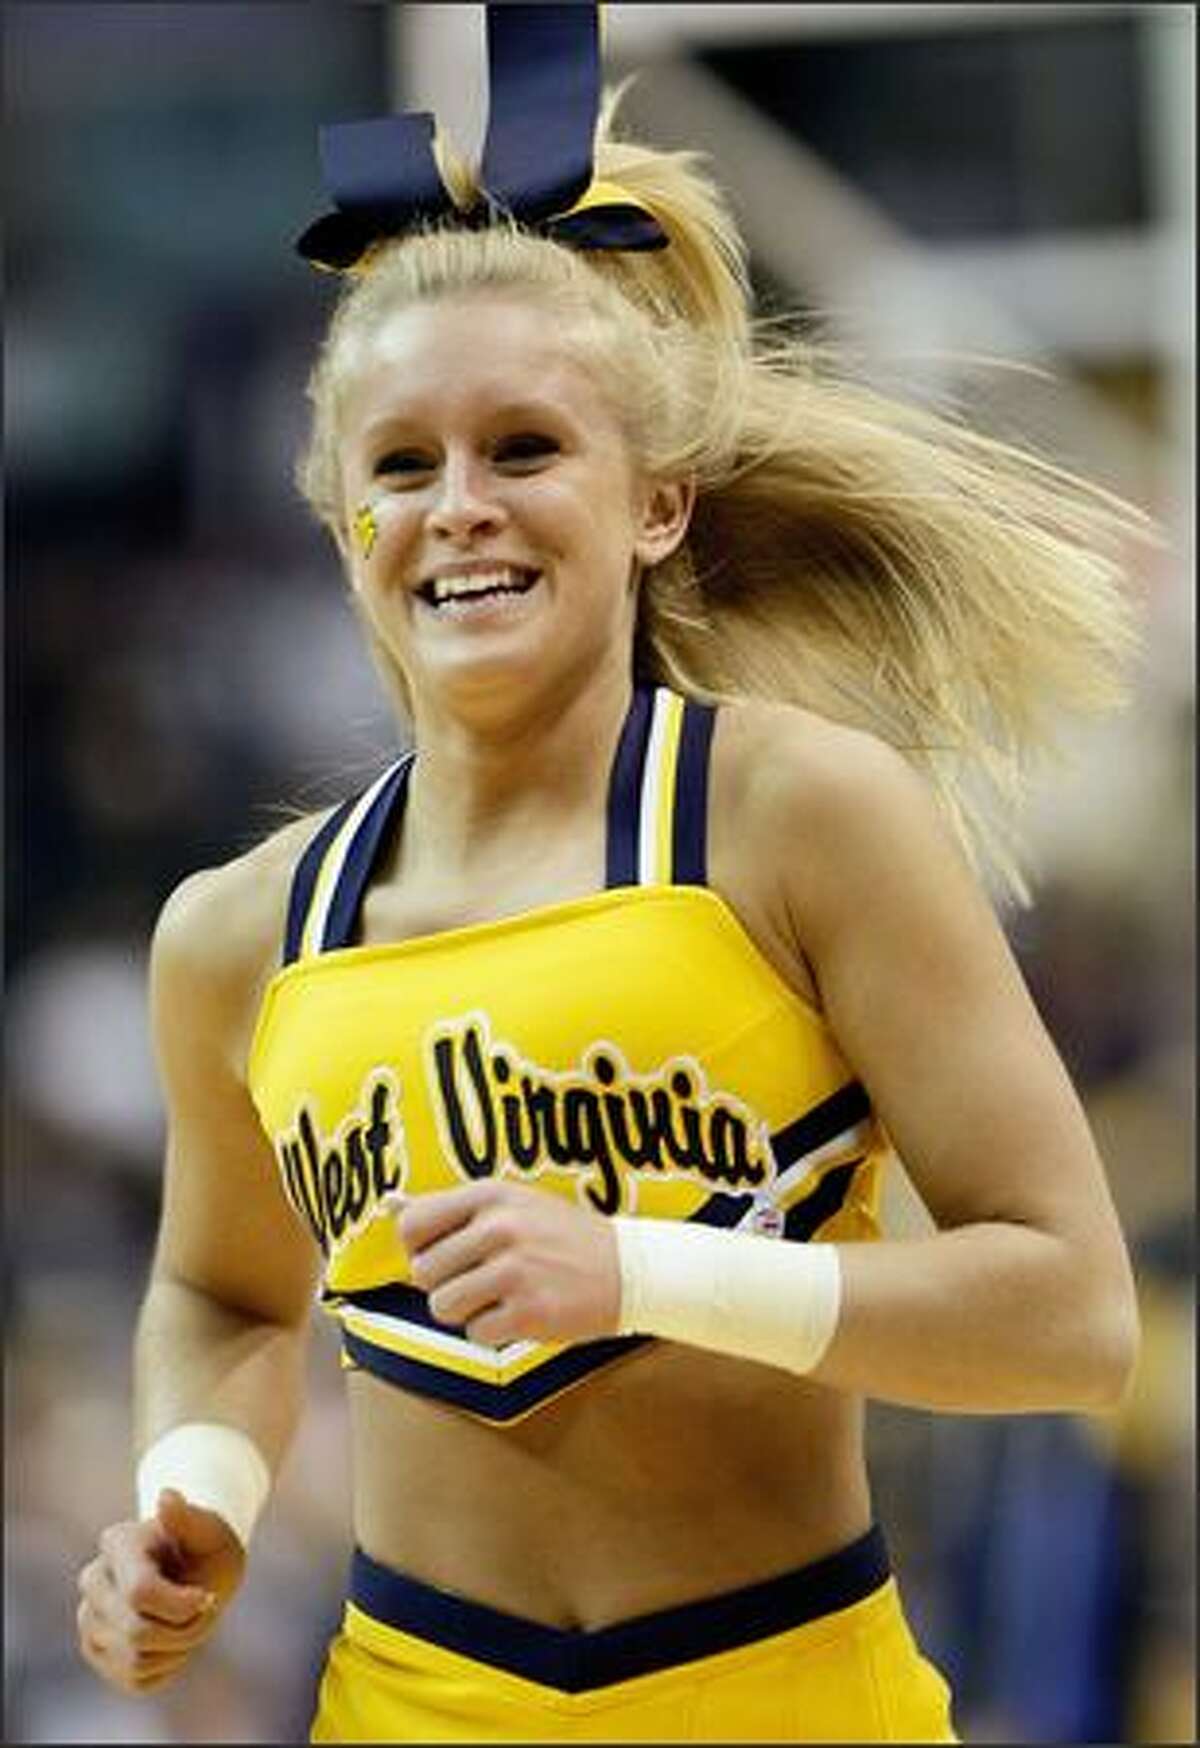 A cheerleader for the West Virginia Mountaineers preforms during a break in play against the Duke Blue Devils during the second round of the West Regional at the Verizon Center in Washington.